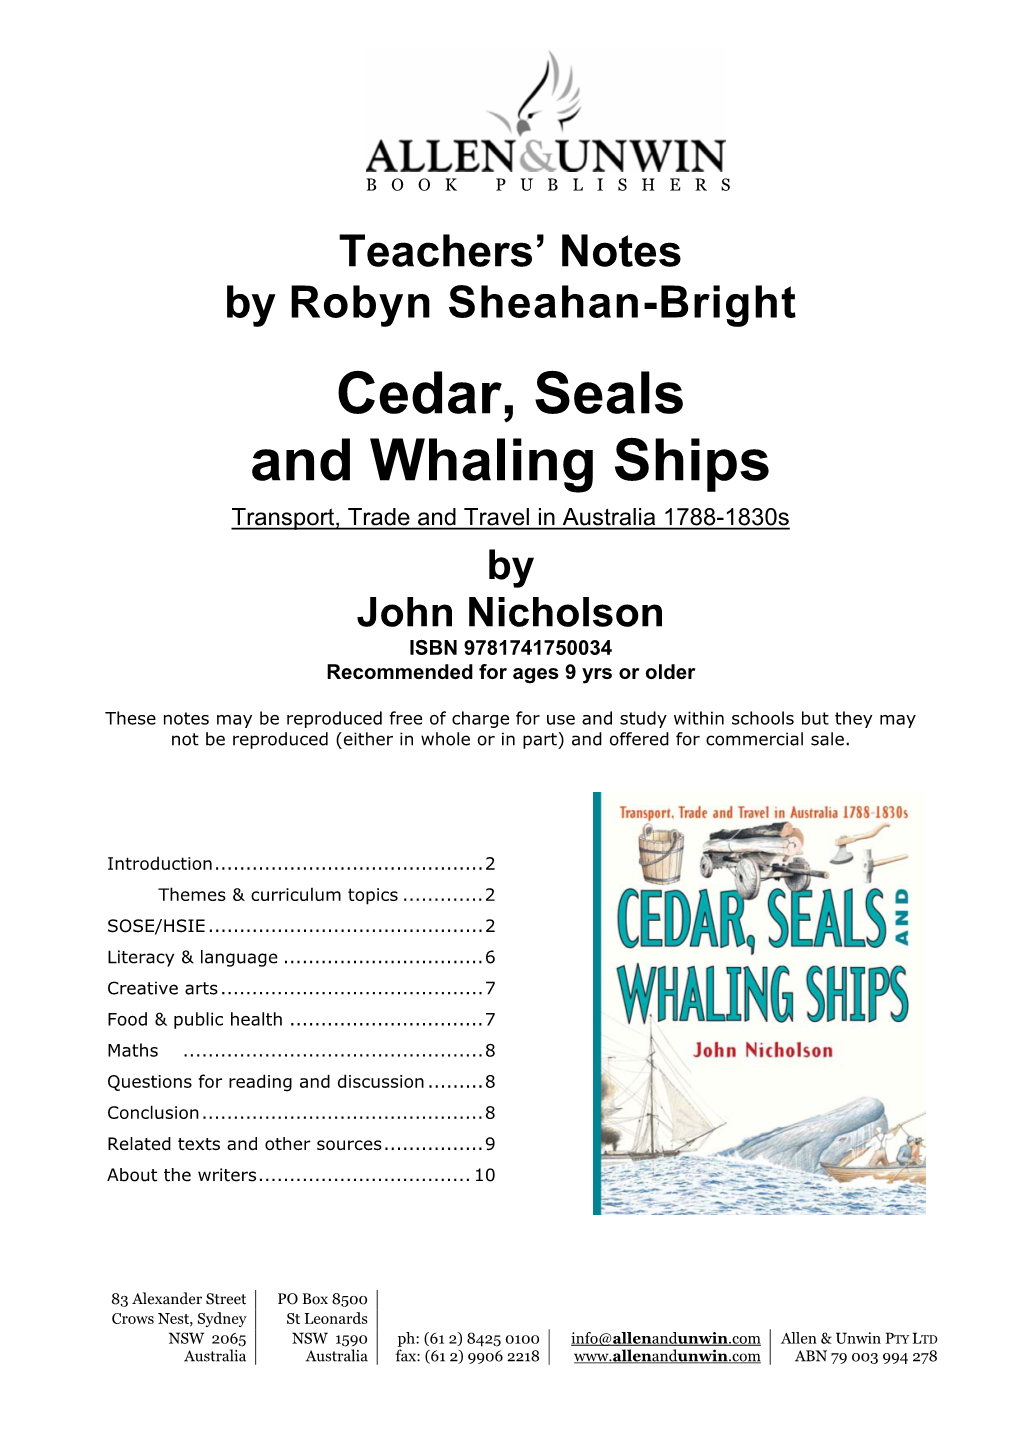 Cedar, Seals and Whaling Ships Transport, Trade and Travel in Australia 1788-1830S by John Nicholson ISBN 9781741750034 Recommended for Ages 9 Yrs Or Older